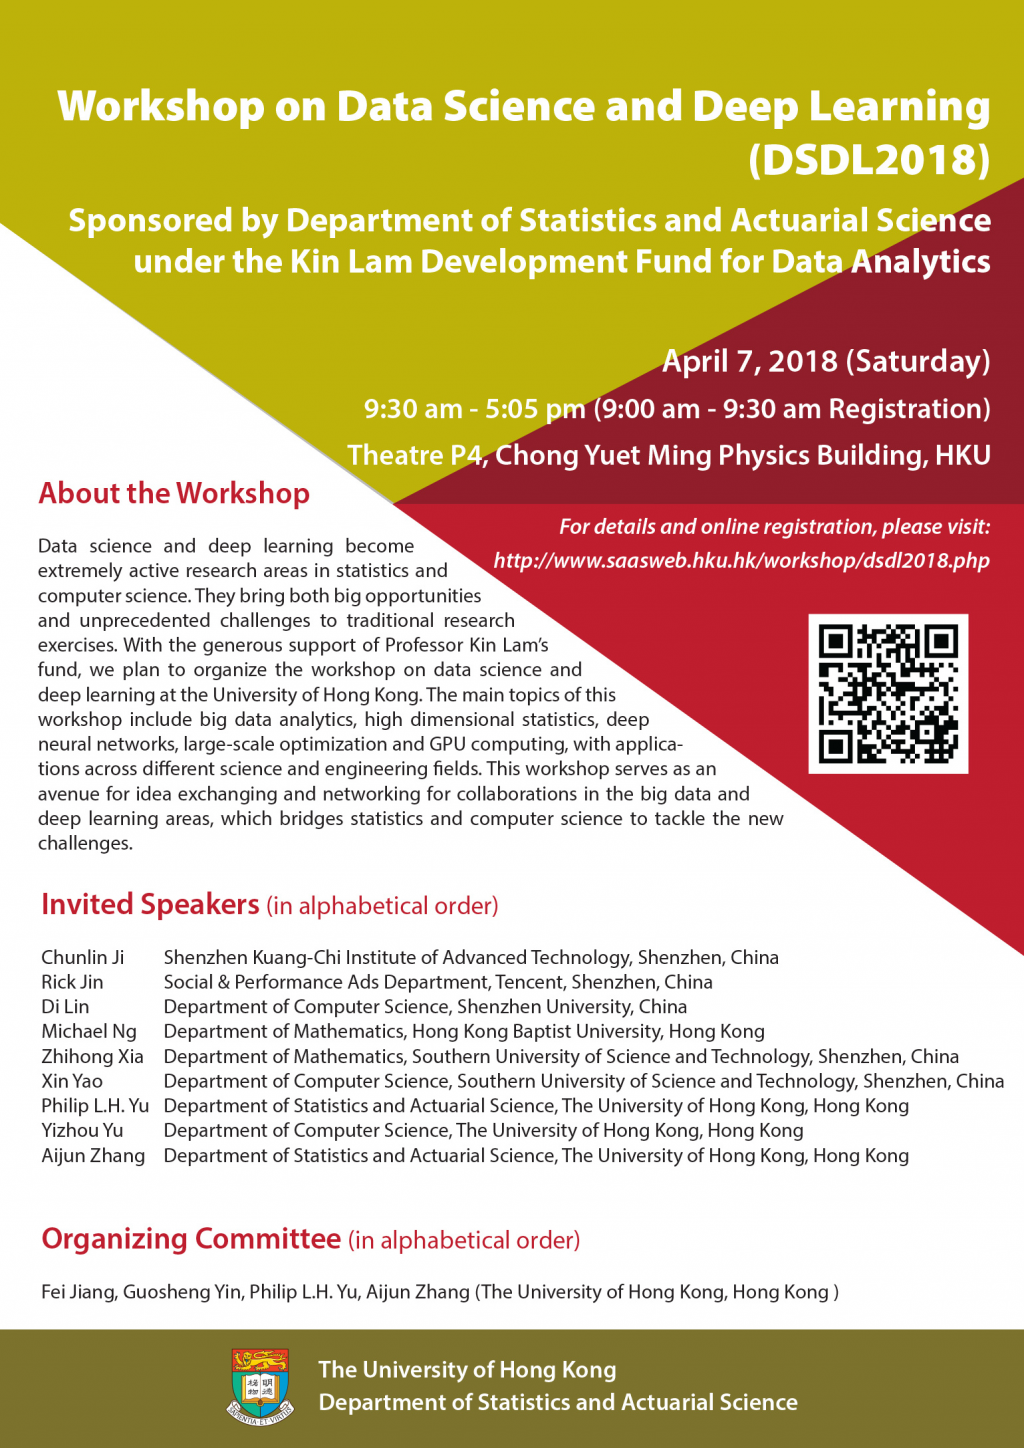 Workshop on Data Science and Deep Learning (DSDL2018) on April 7, 2018